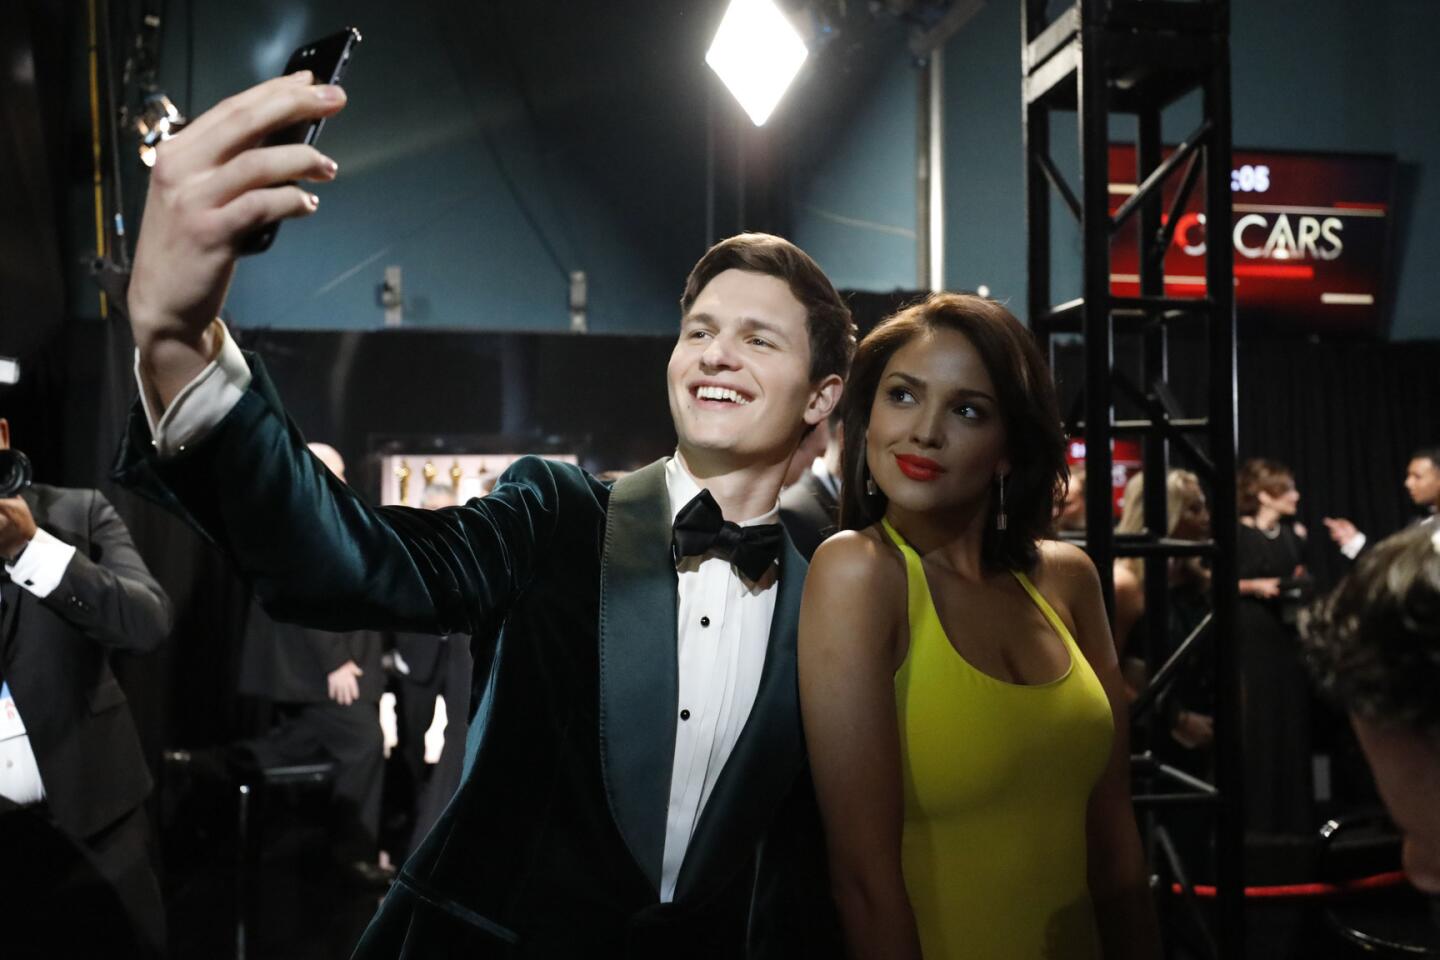 Ansel Elgort and Eiza Gonzalez backstage at the 90th Academy Awards on Sunday at the Dolby Theatre in Hollywood.